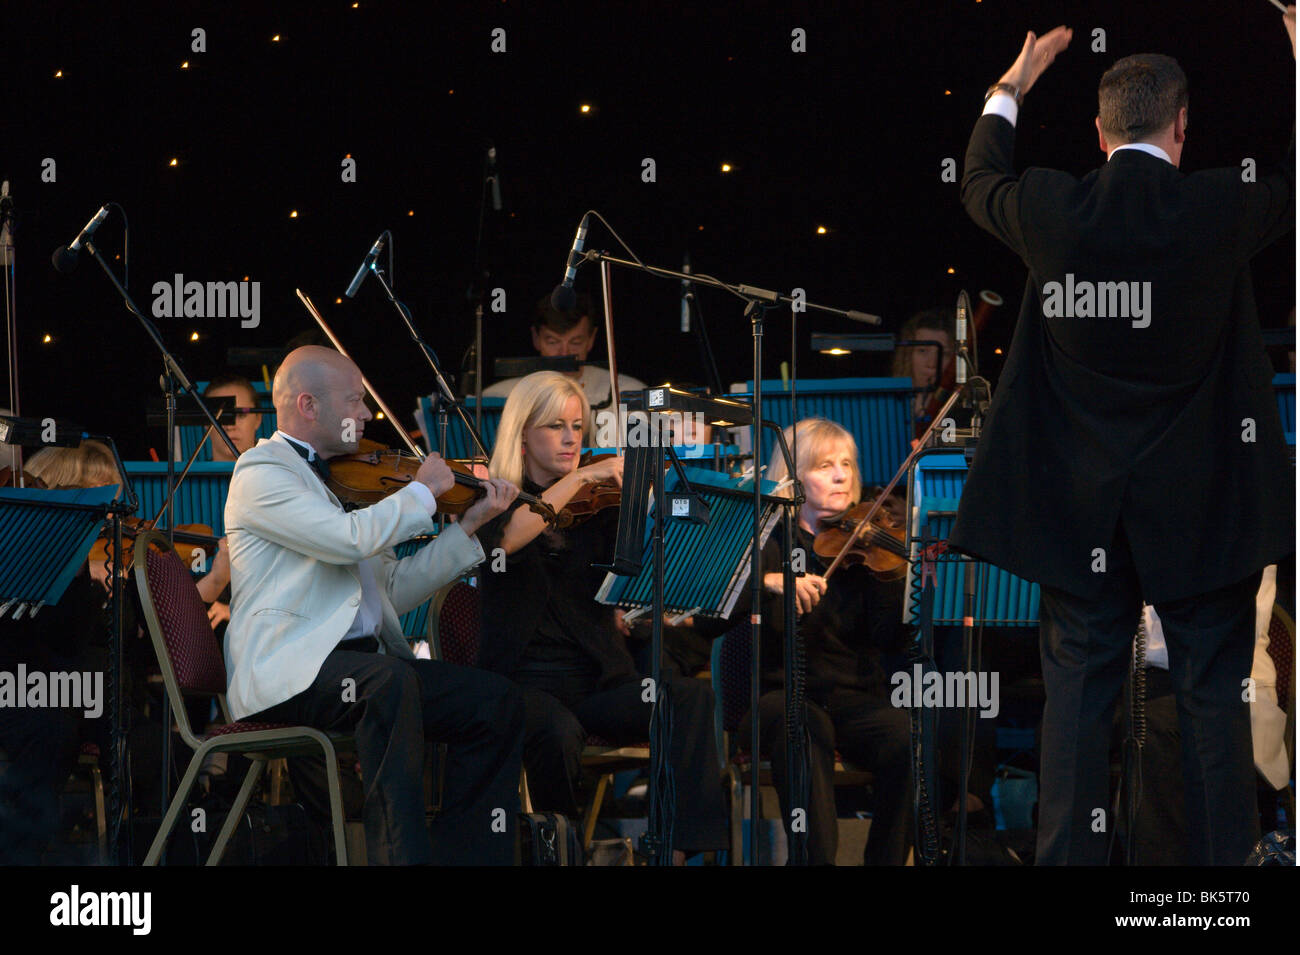 Stephen Bell conducting London Gala Orchestra Bedford Prom in Park Stock Photo